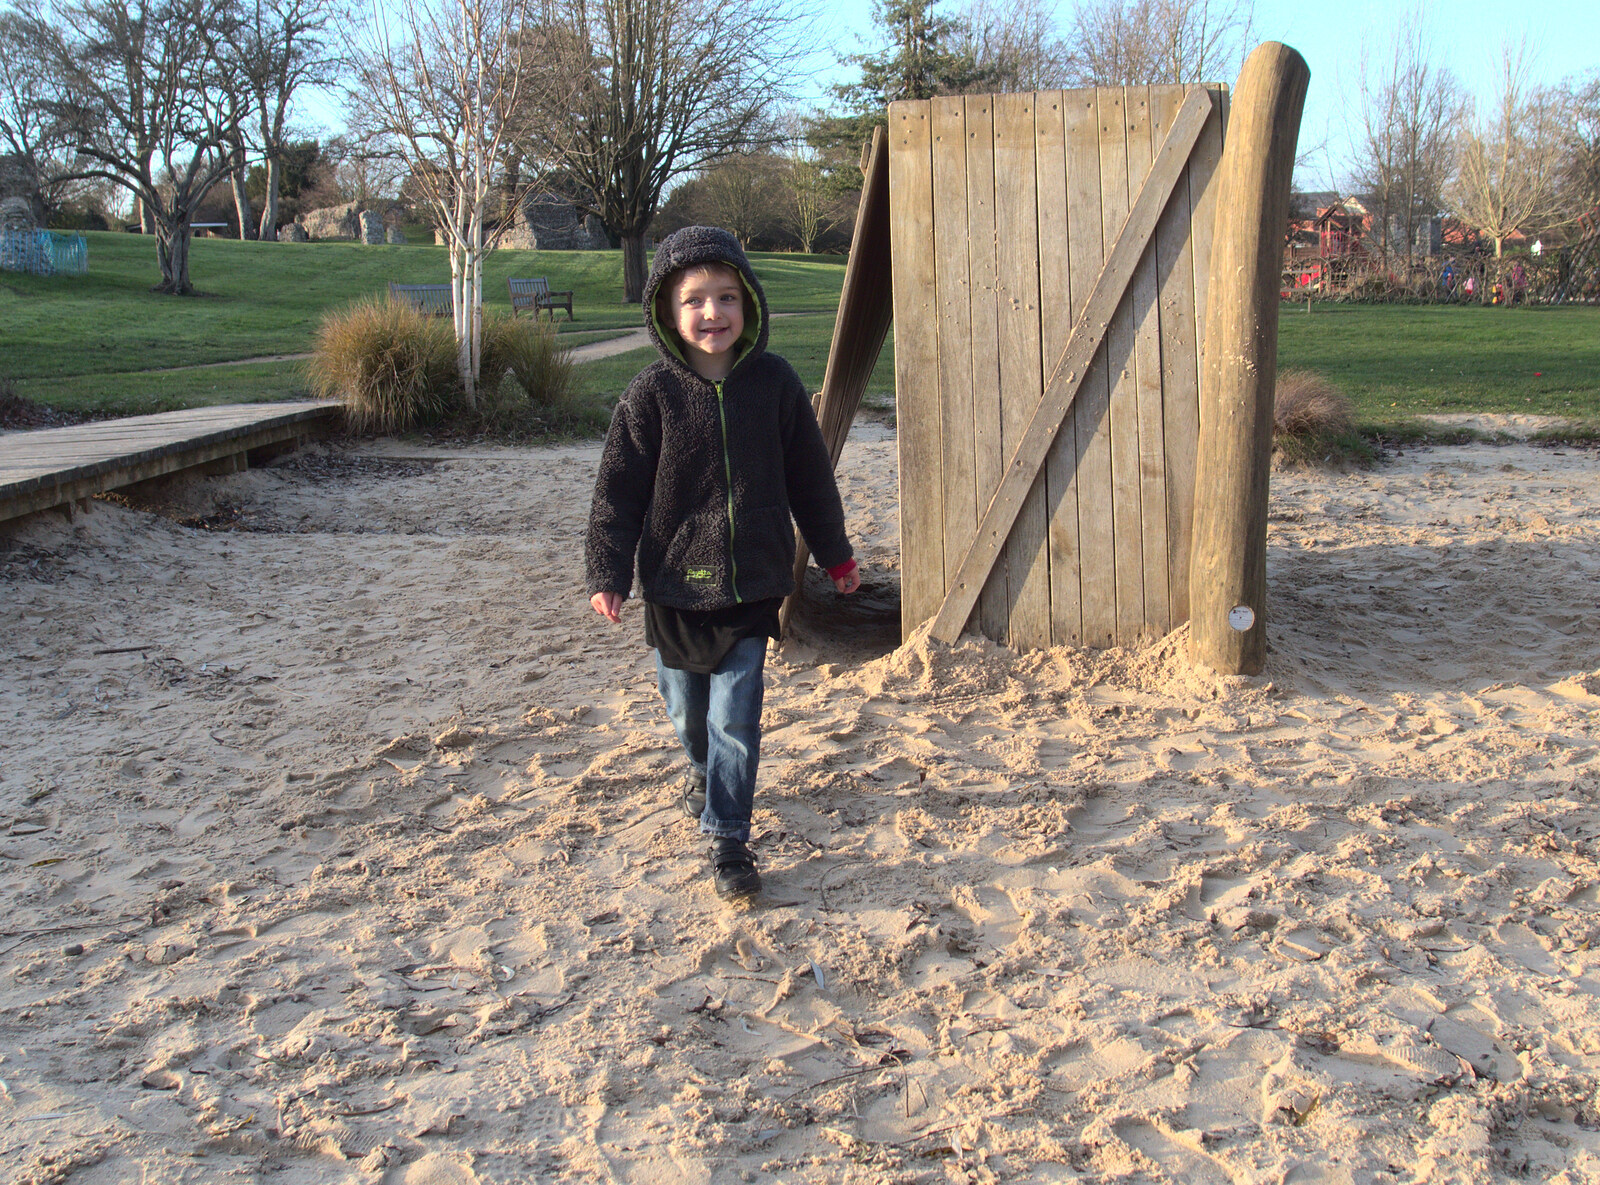 Fred on the sandpit from A Trip to Abbey Gardens, Bury St. Edmunds, Suffolk - 20th December 2014